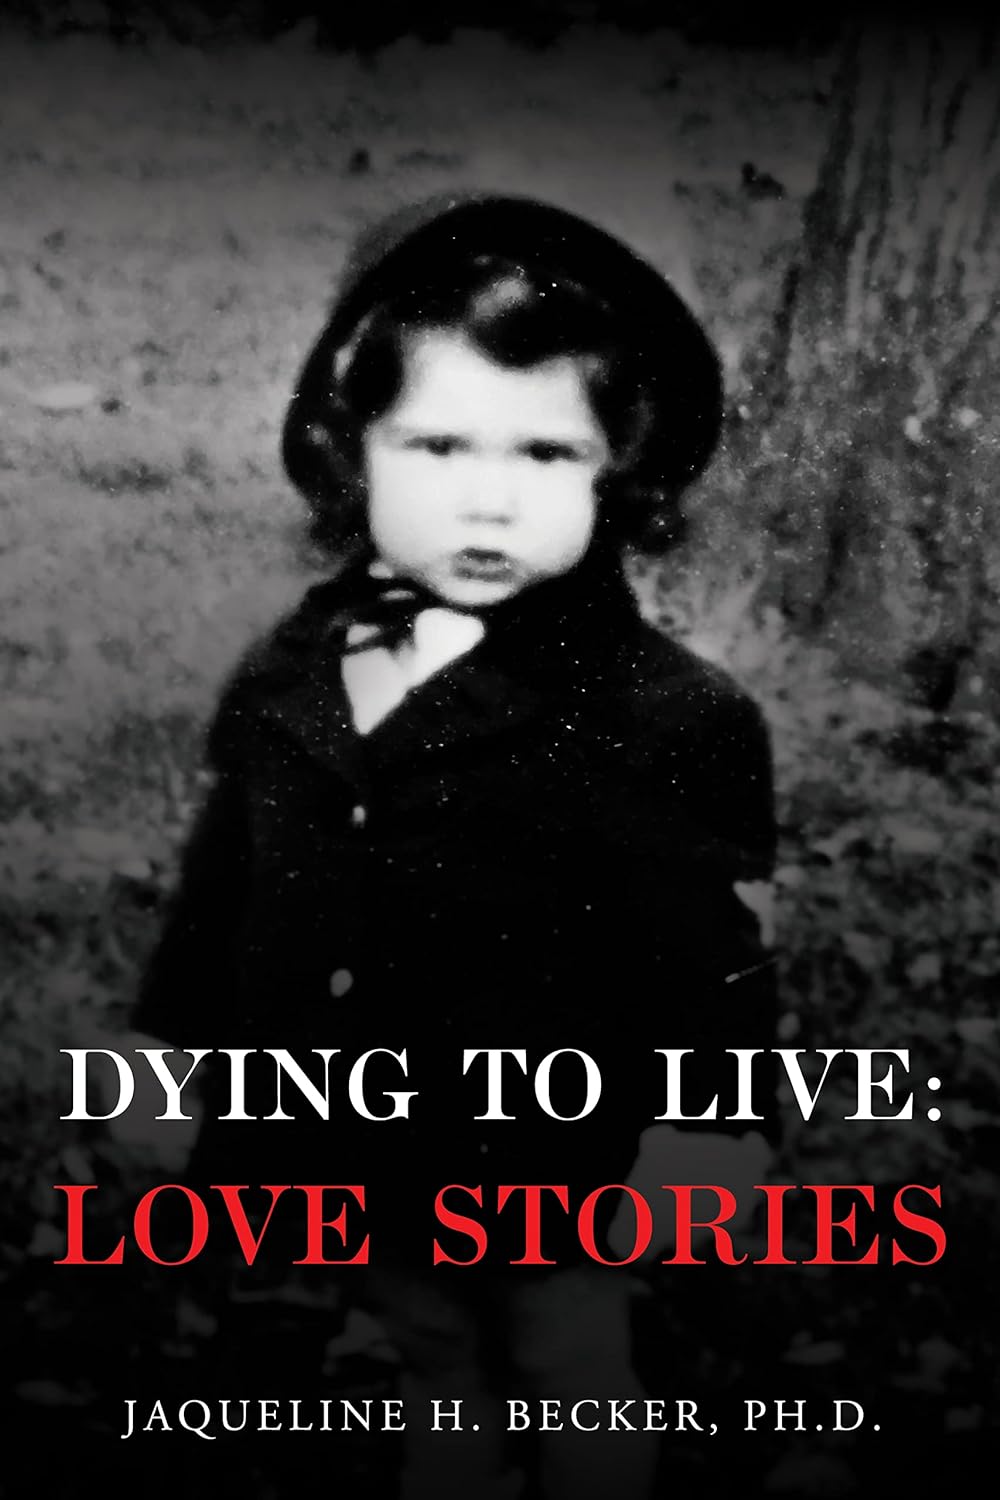 Dying to Live: Love Stories by Jaqueline H. Becker, Ph.D.